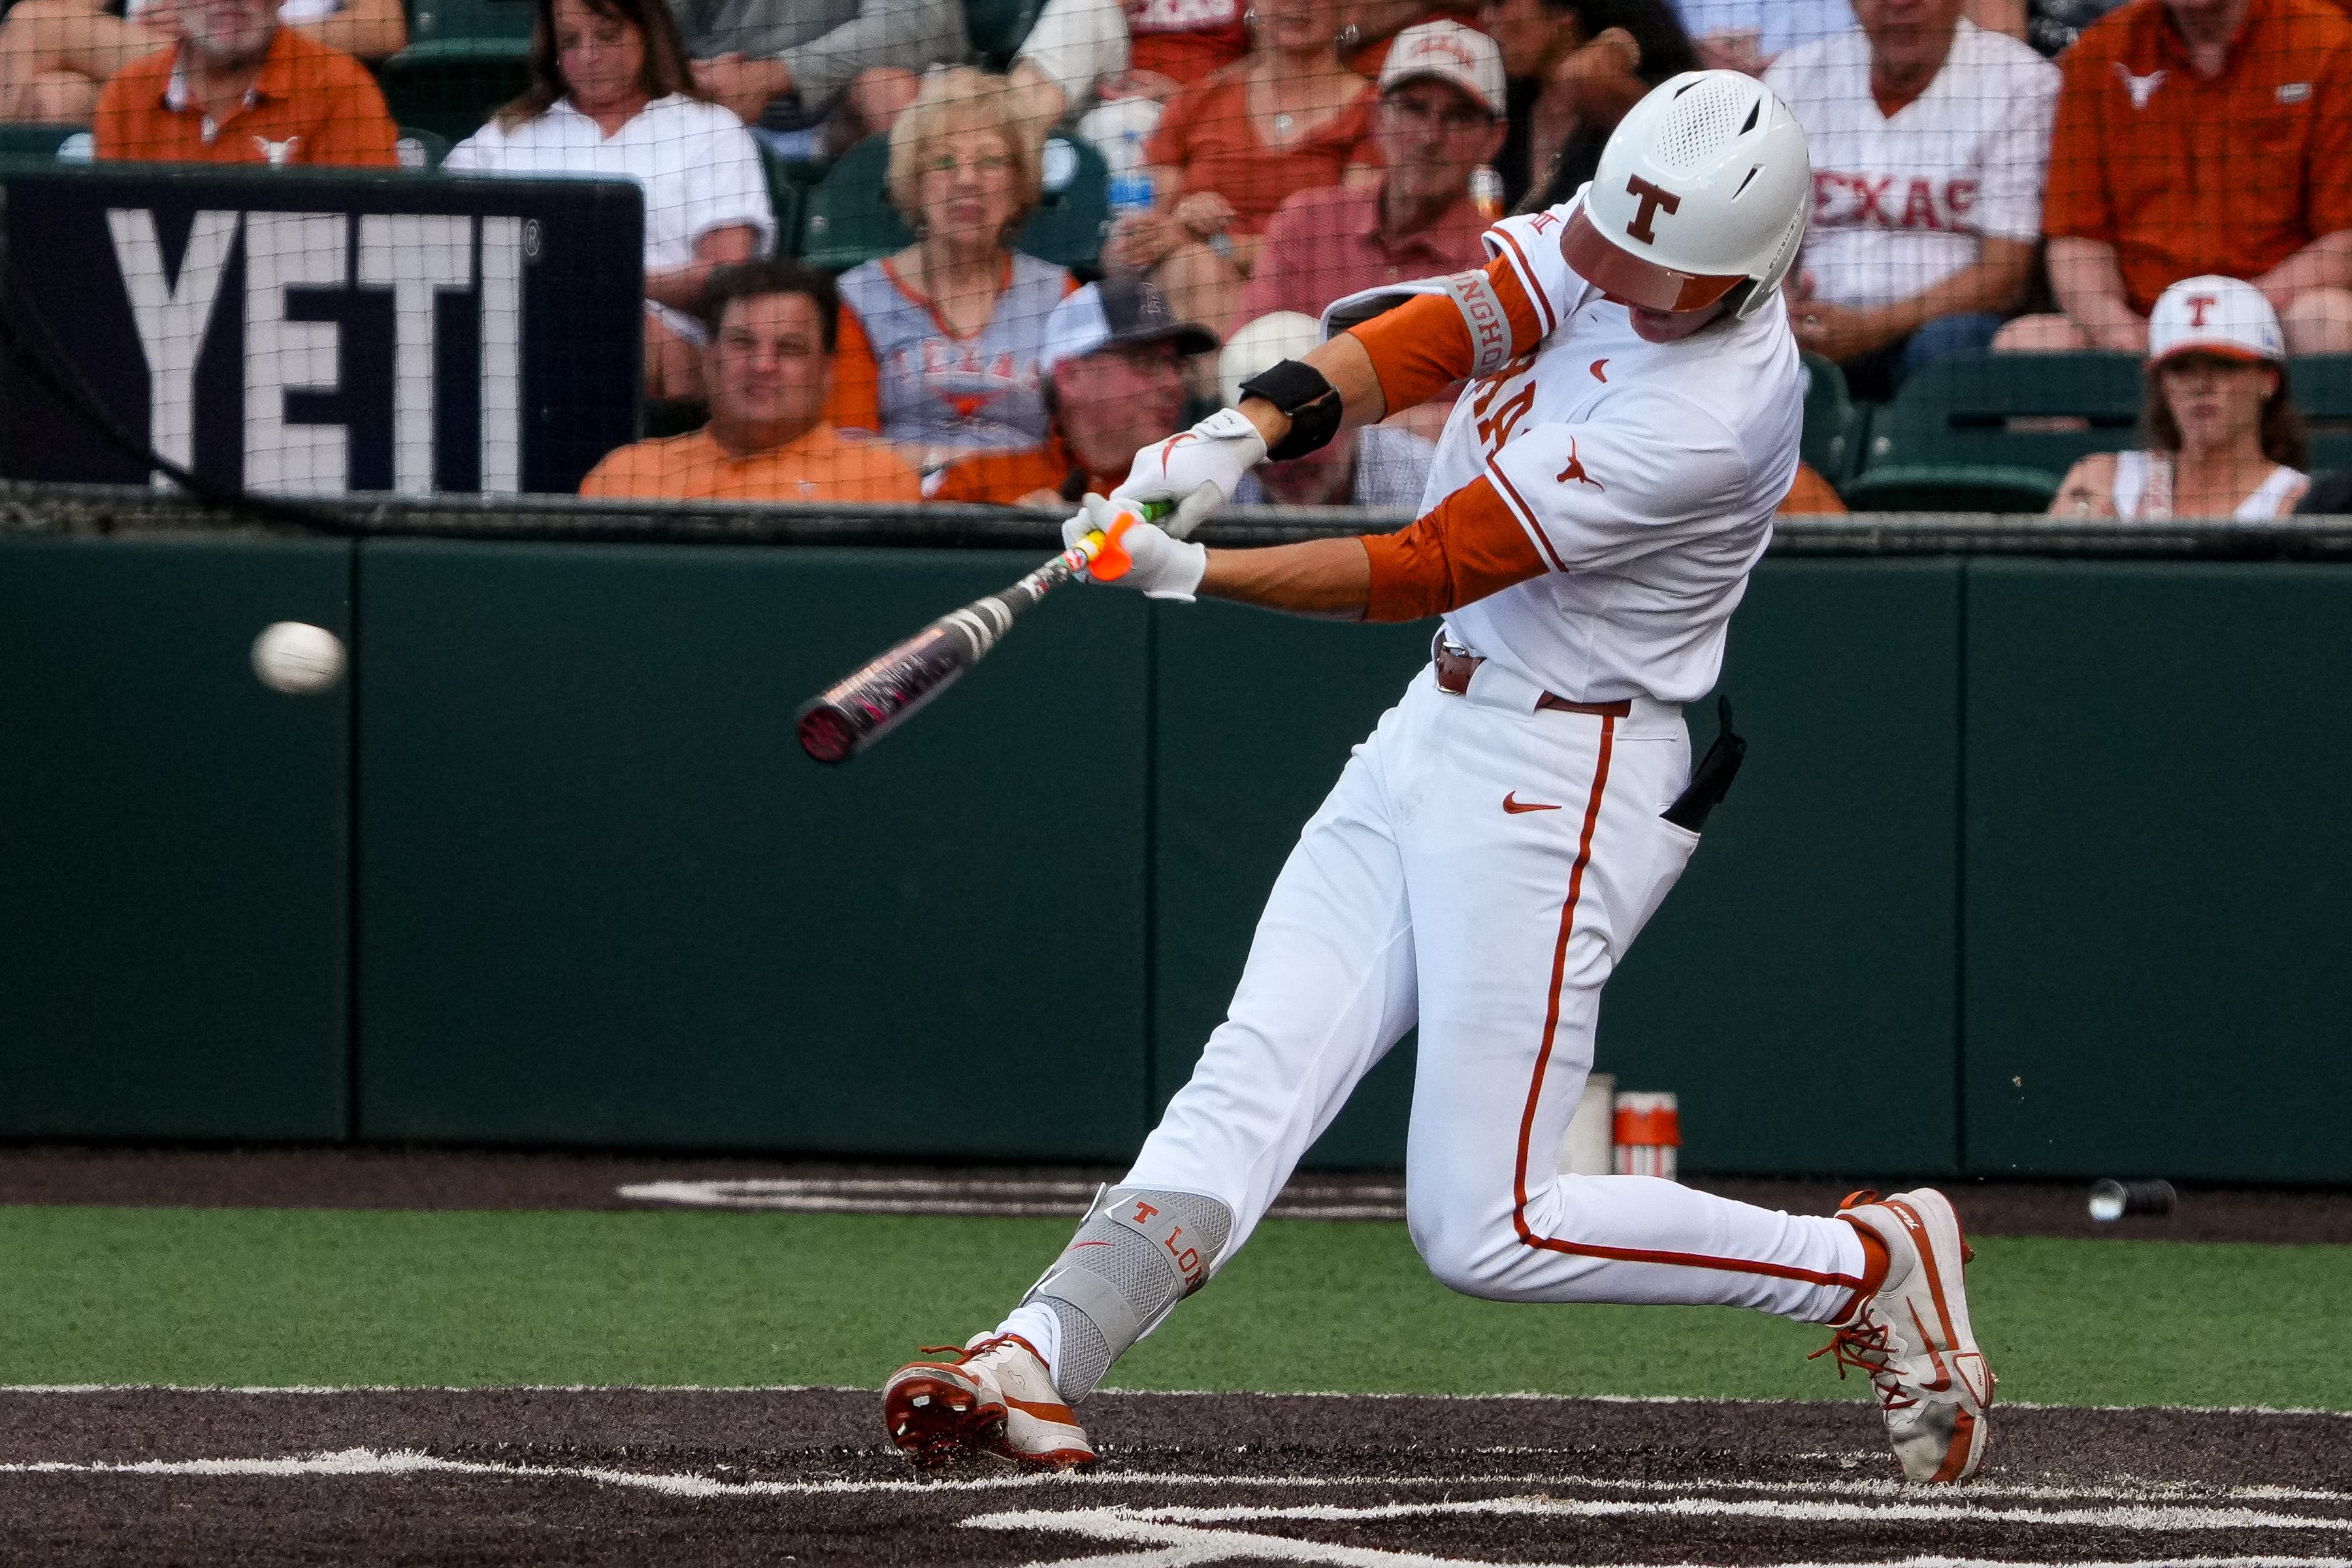 Texas baseball certainly won't host a regional without Big 12 tourney win | Golden